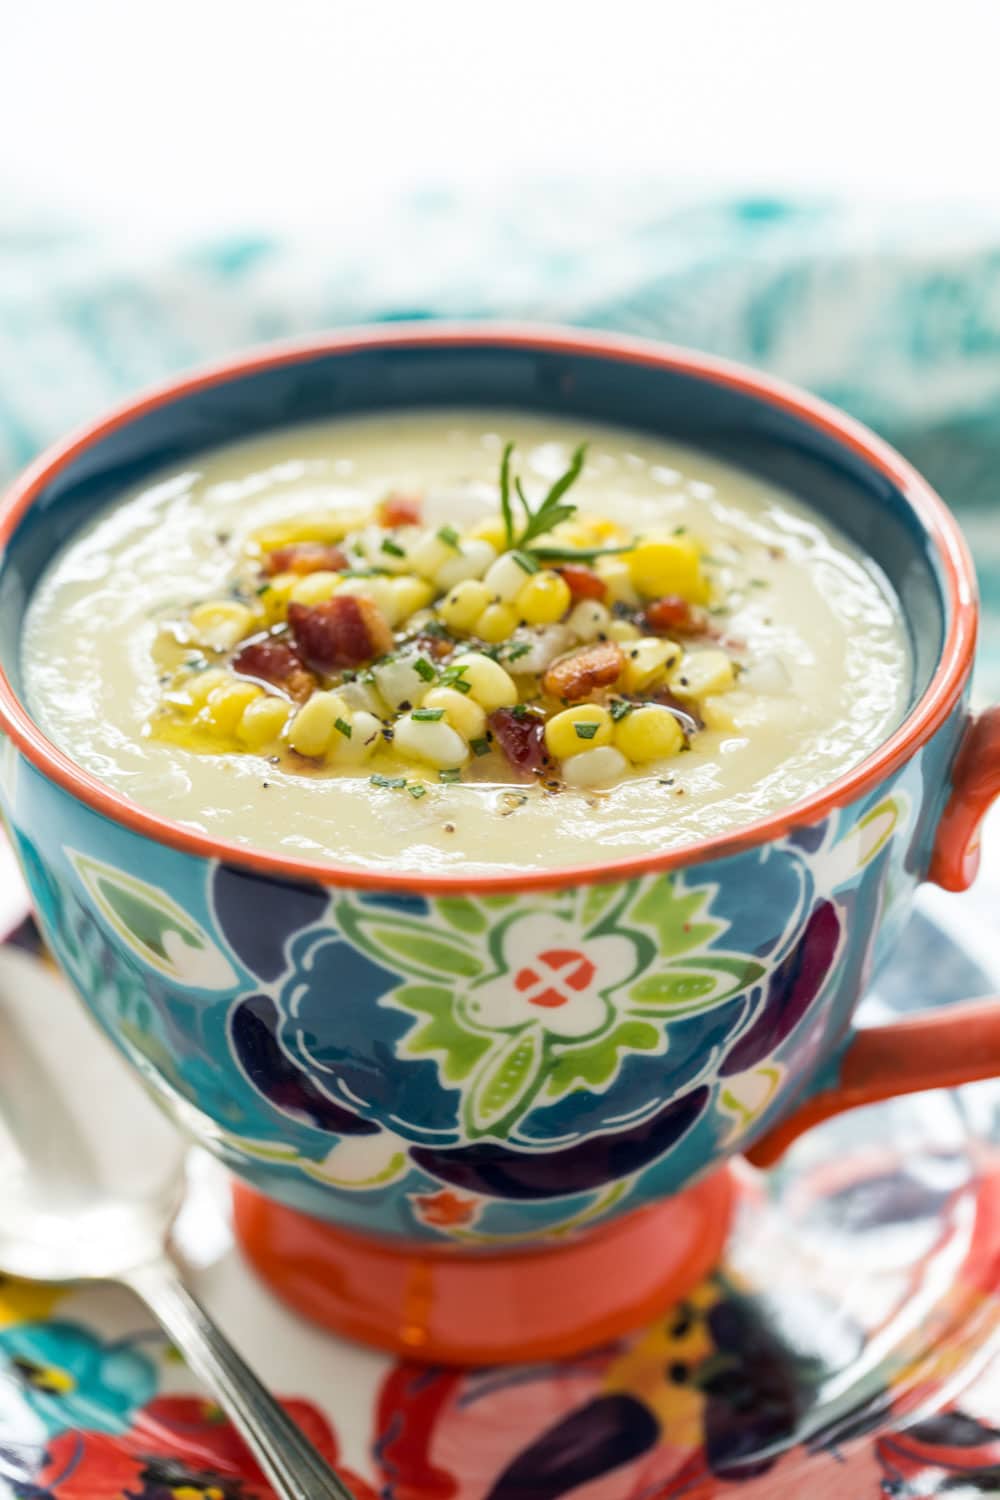 Vertical closeup photo of Fresh Corn Soup in a floral mug and plate.